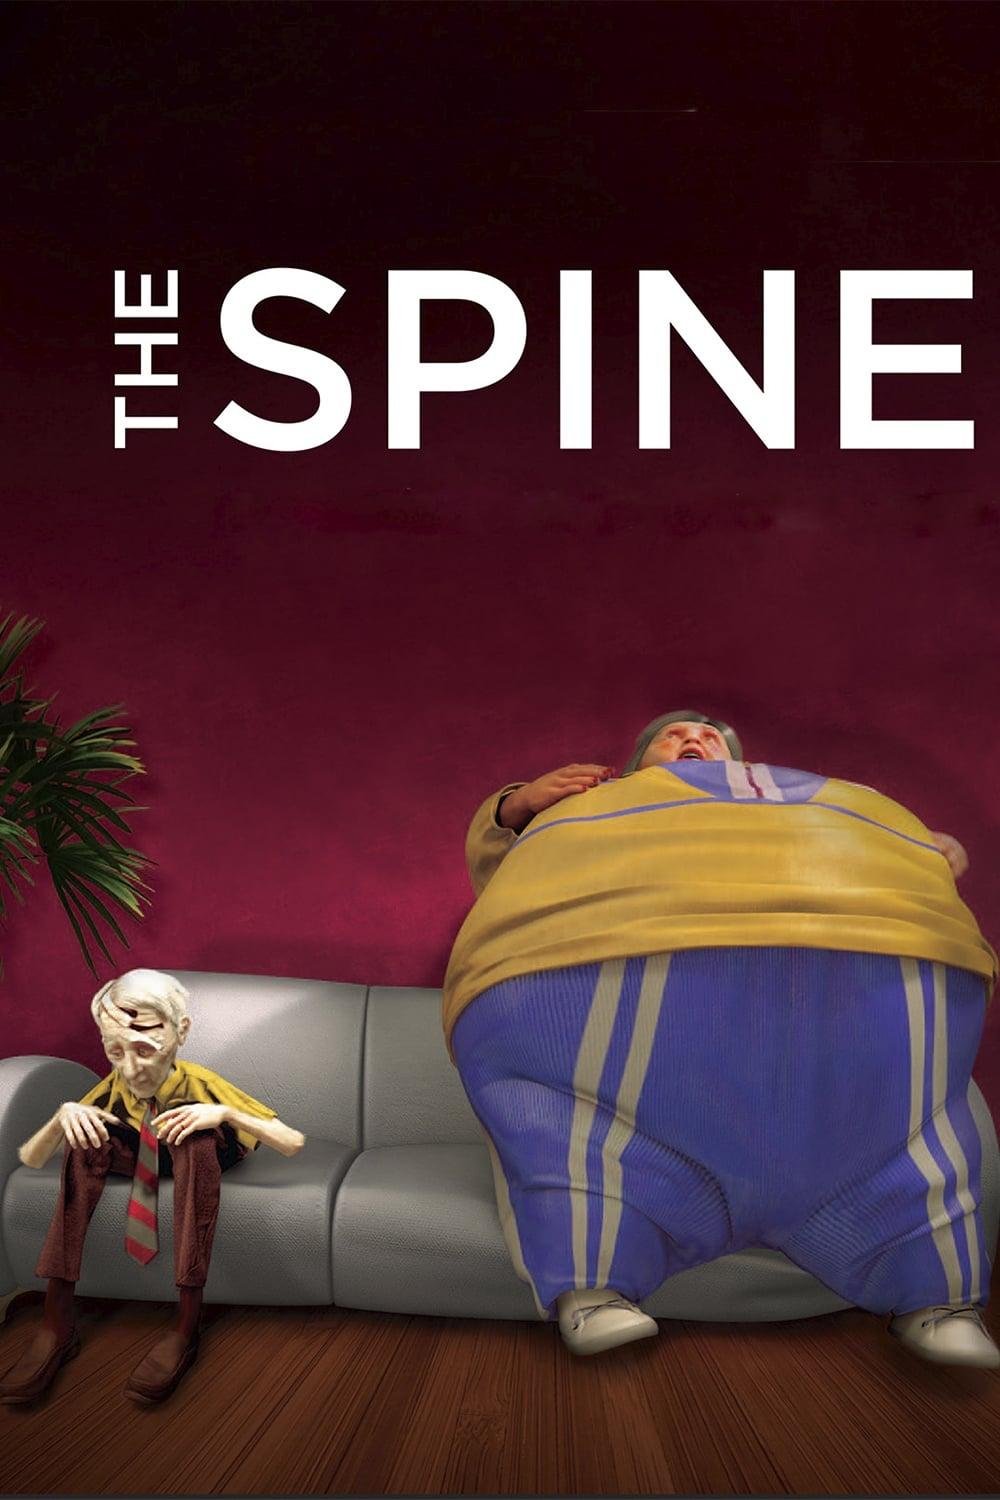 The Spine poster